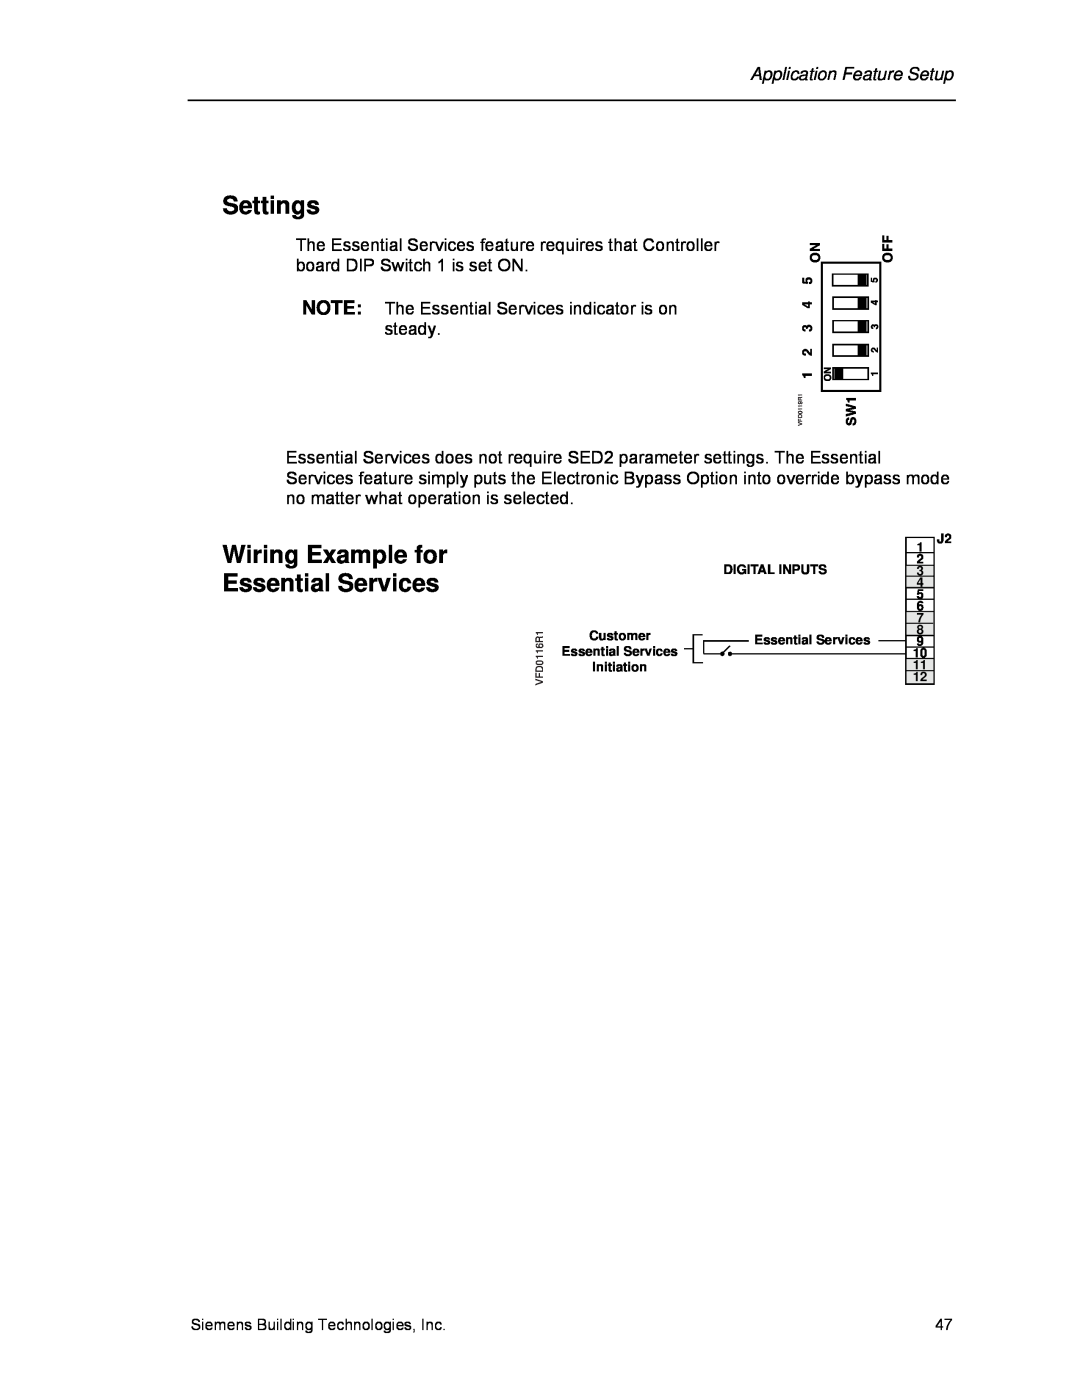 Siemens 125-3208 operating instructions Wiring Example for Essential Services, Settings, Siemens Building Technologies, Inc 